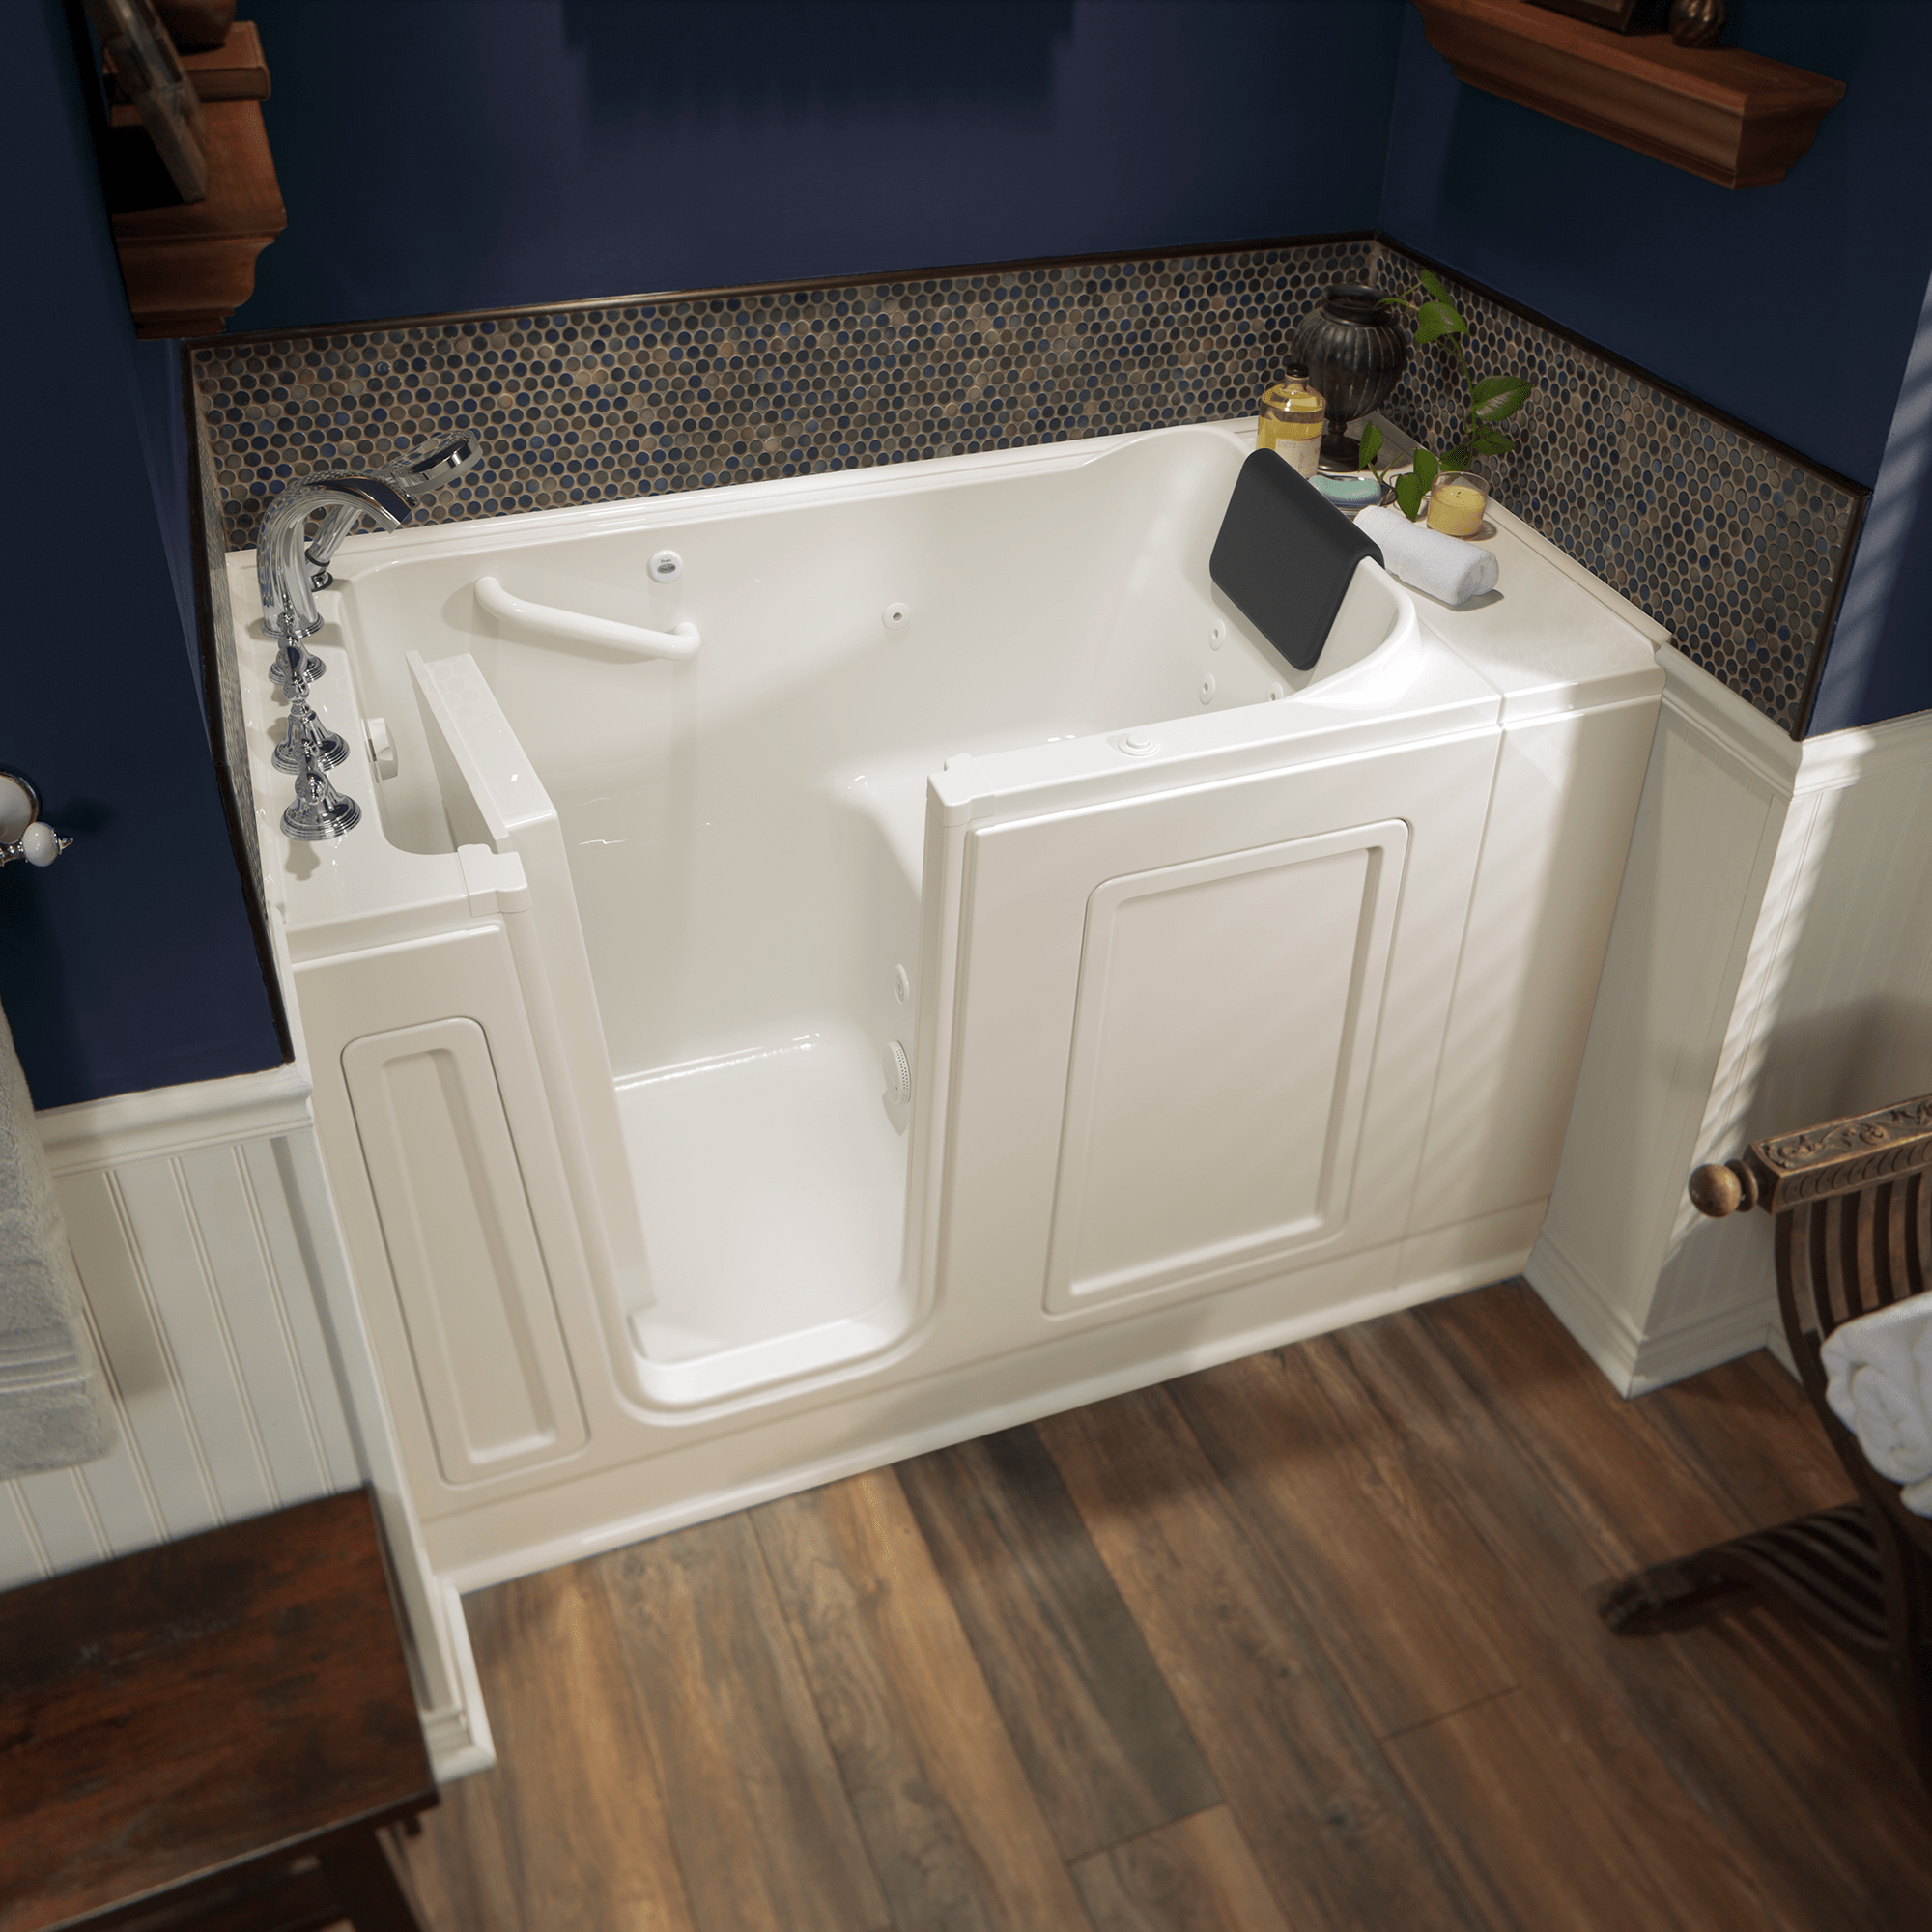 Acrylic Luxury Series 30 x 51 -Inch Walk-in Tub With Whirlpool System - Left-Hand Drain With Faucet